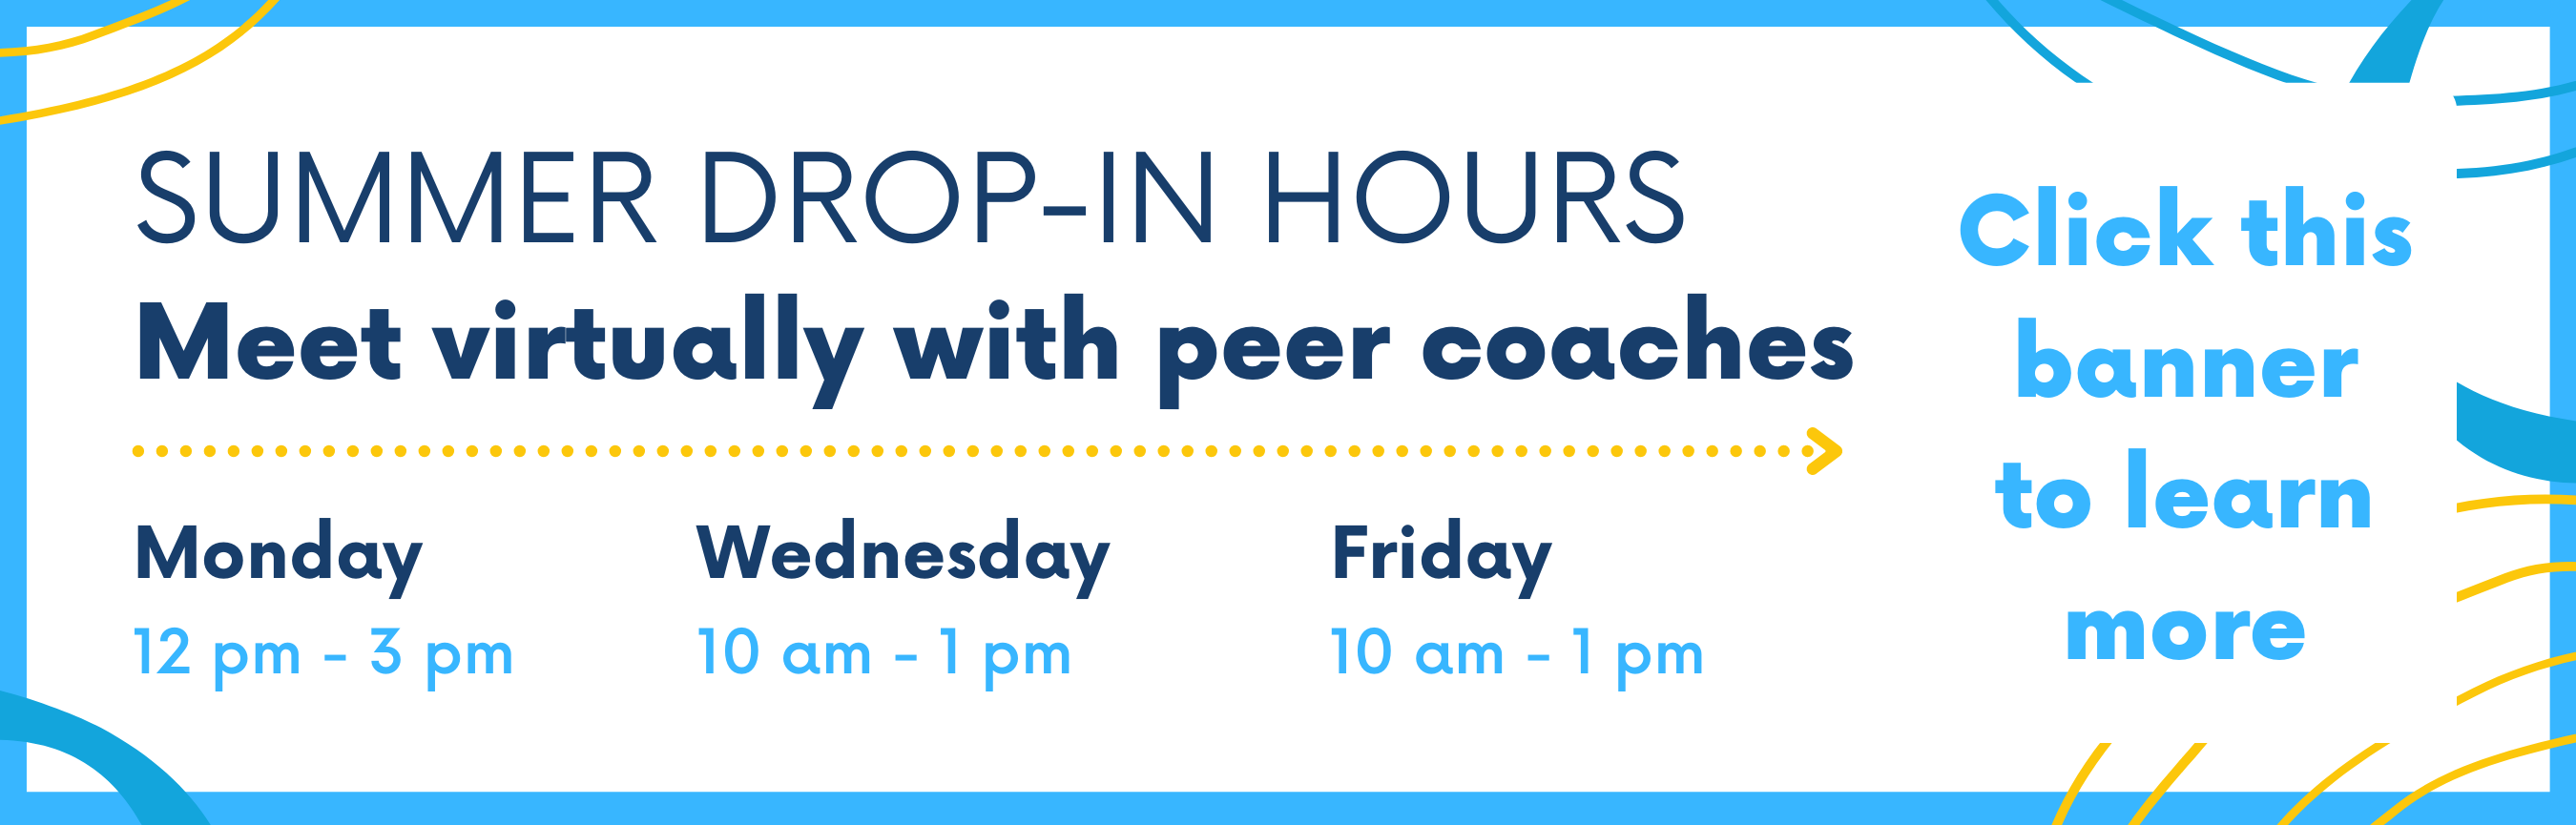 SUMMER DROP-IN HOURS: Meet virtually with peer coaches. Monday: 12 to 3 pm. Wednesday: 10 am to 1 pm. Friday: 10 am to 1 pm. Click this banner to learn more. 